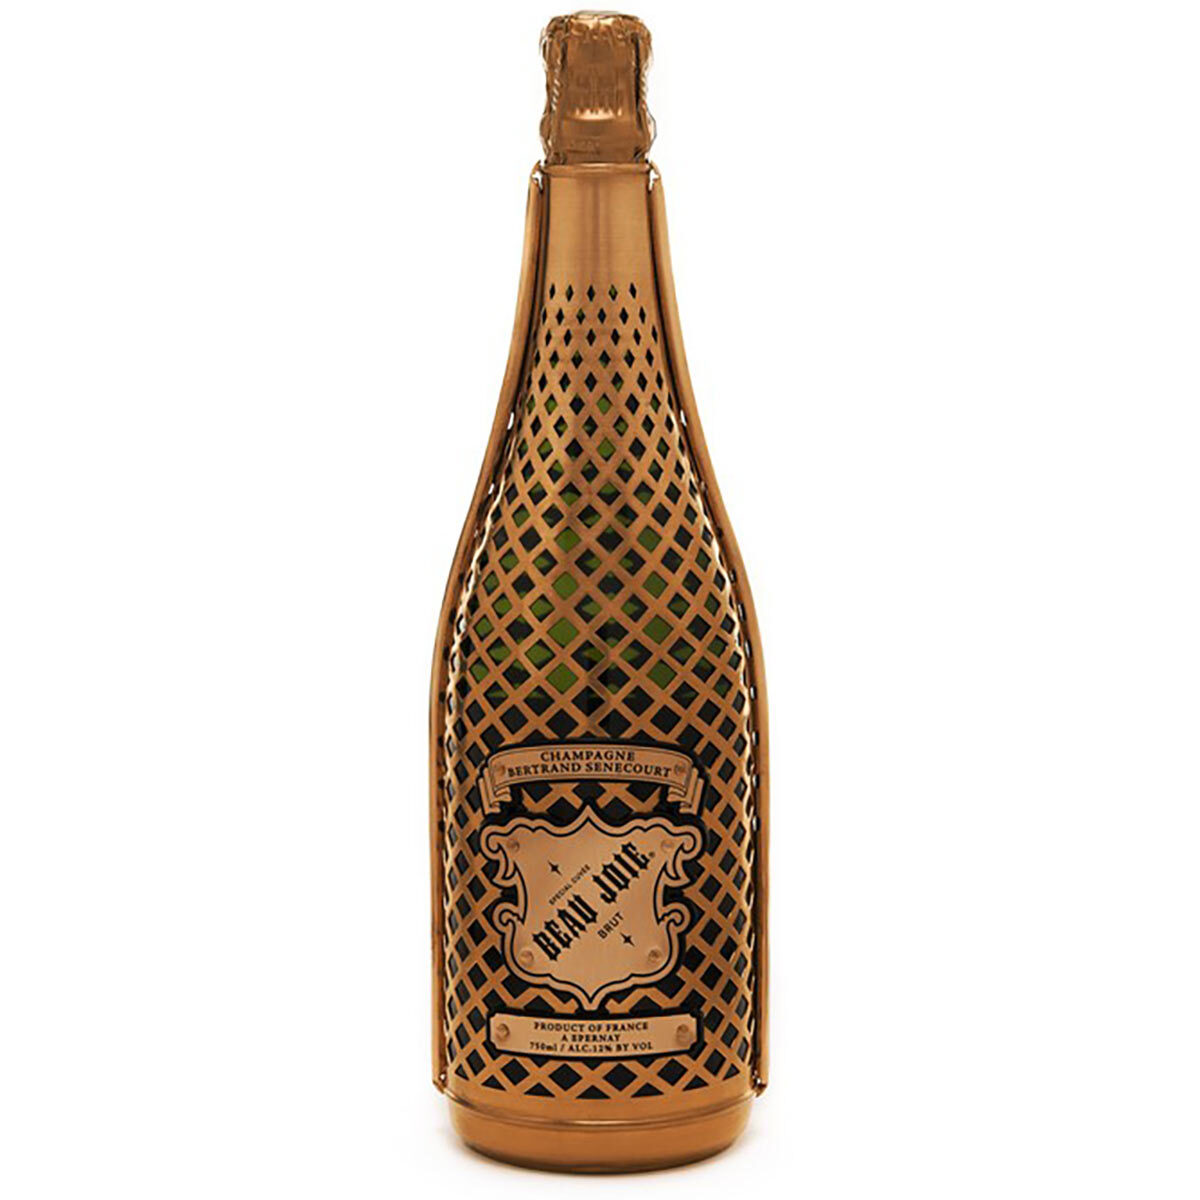 Image of bottle of Beau Joie Brut Champagne